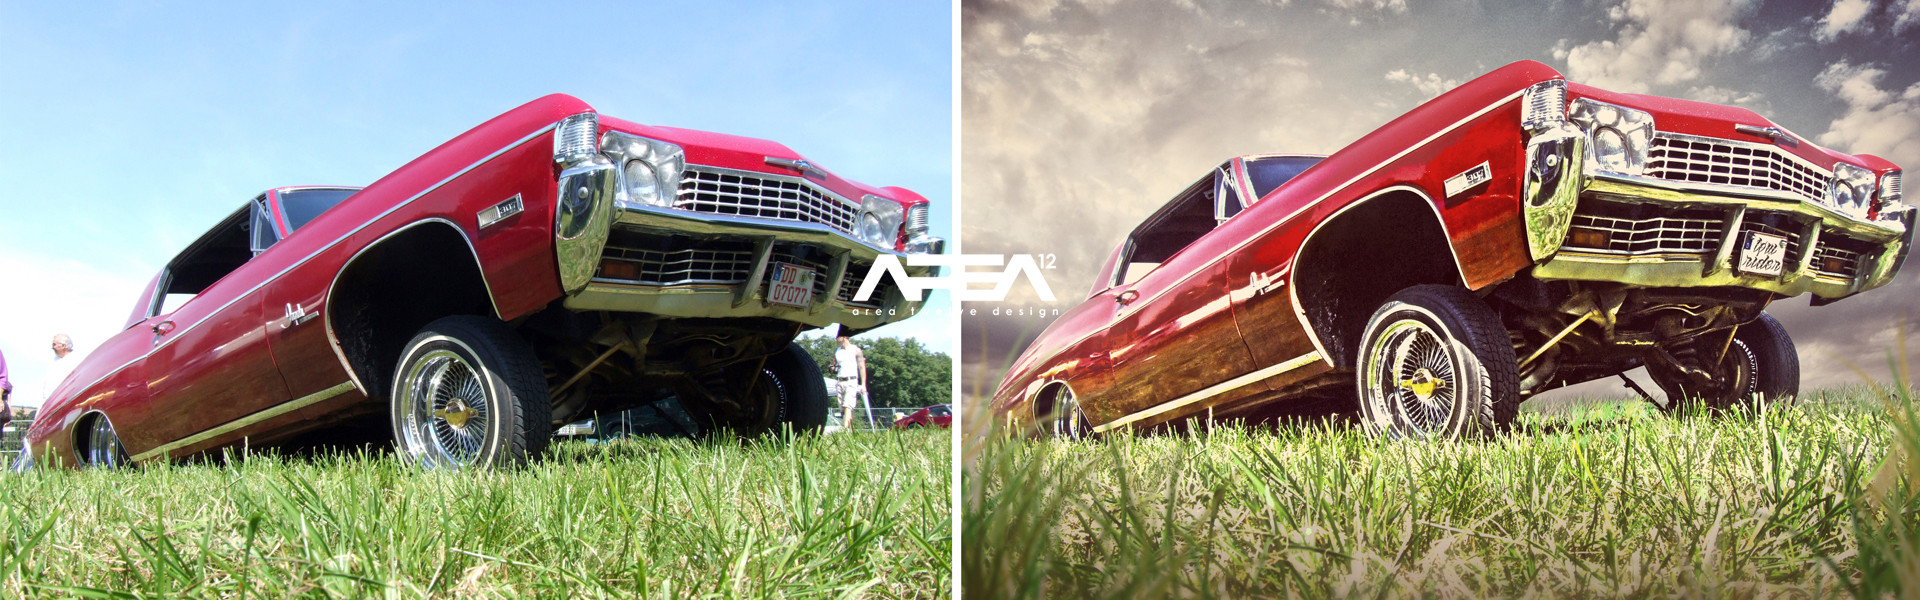 before_after_lowrider